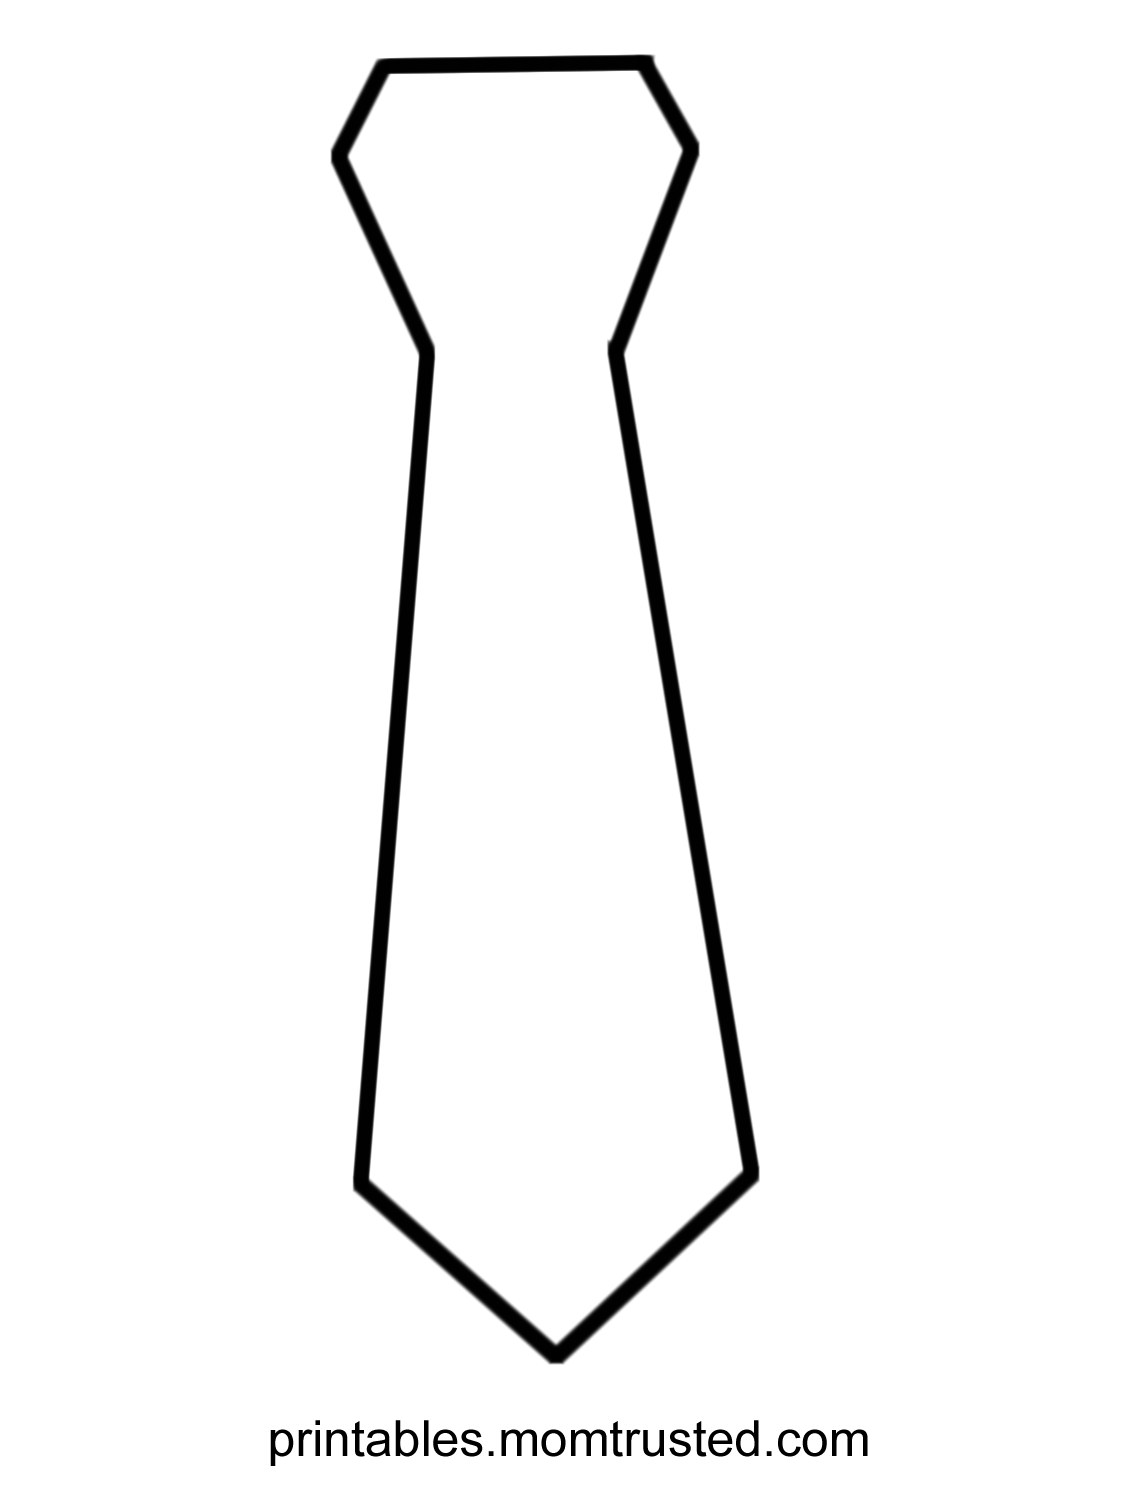 clipart tie black and white - photo #42